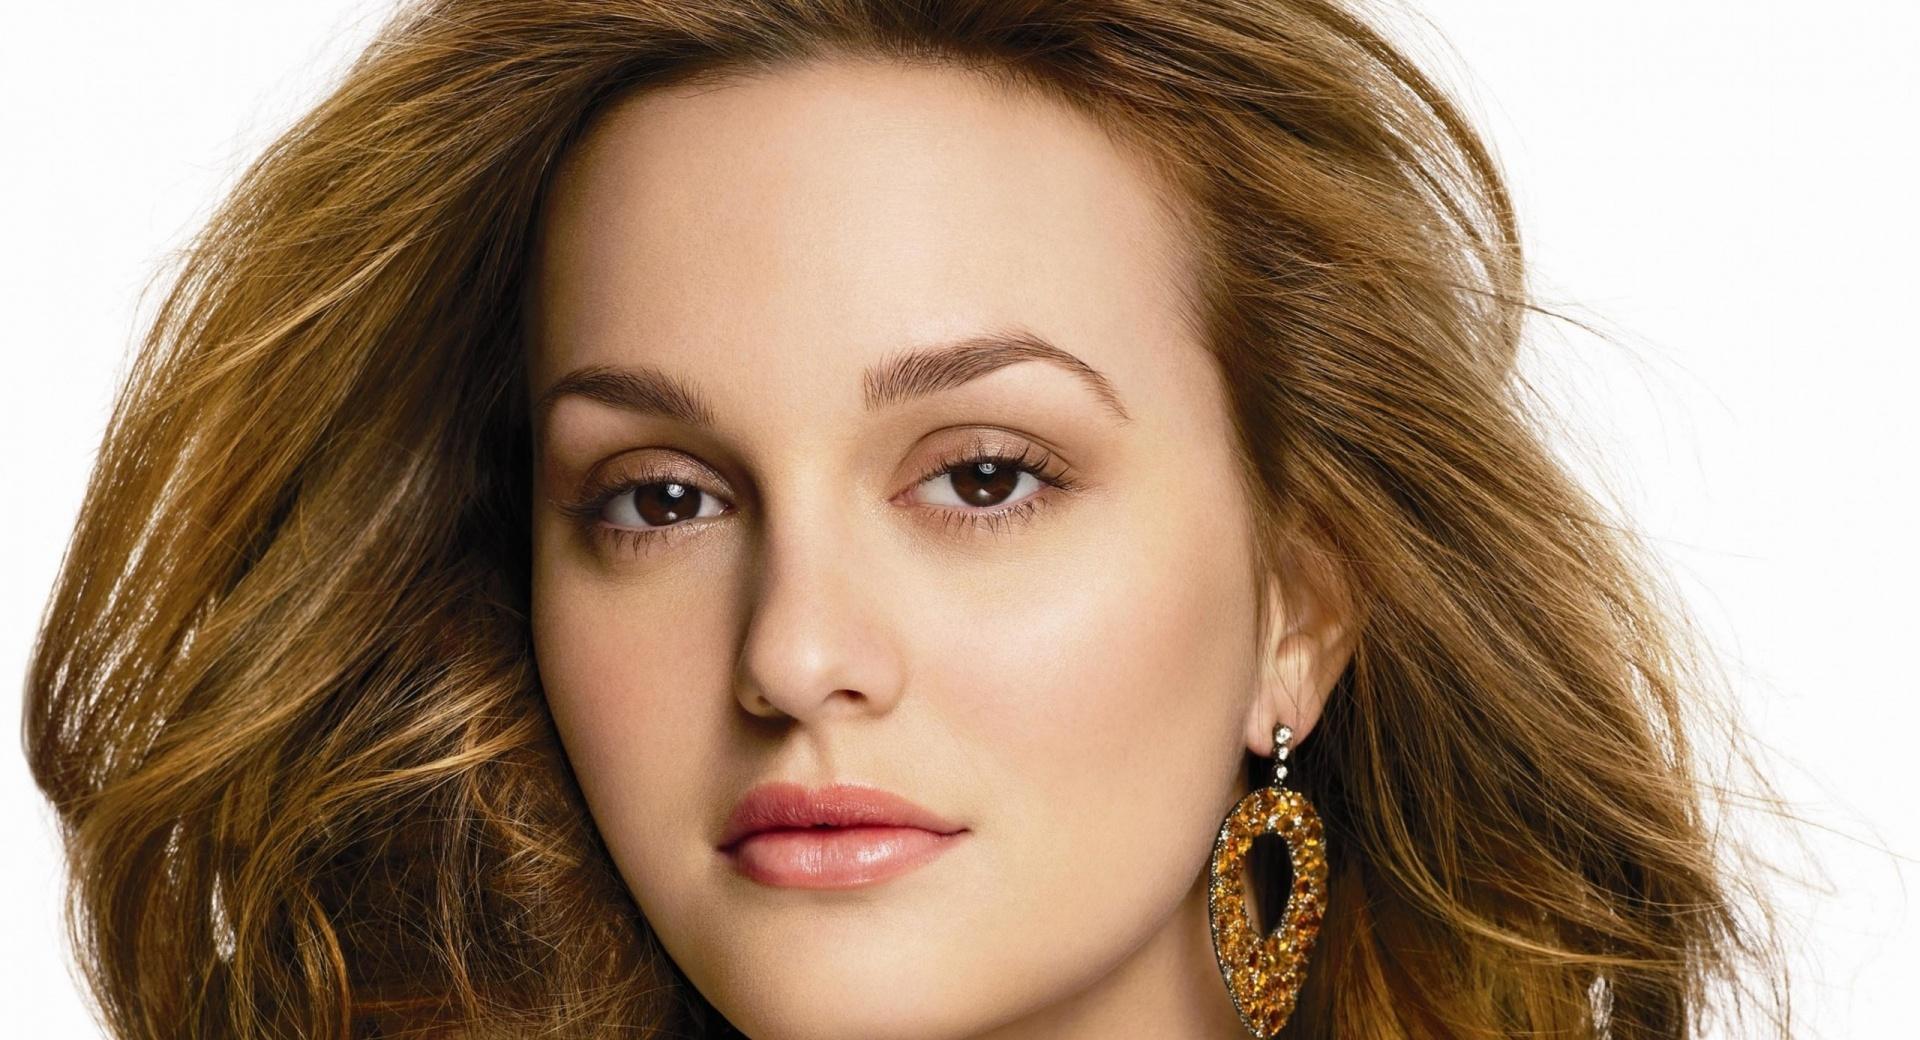 Leighton Meester Portrait wallpapers HD quality